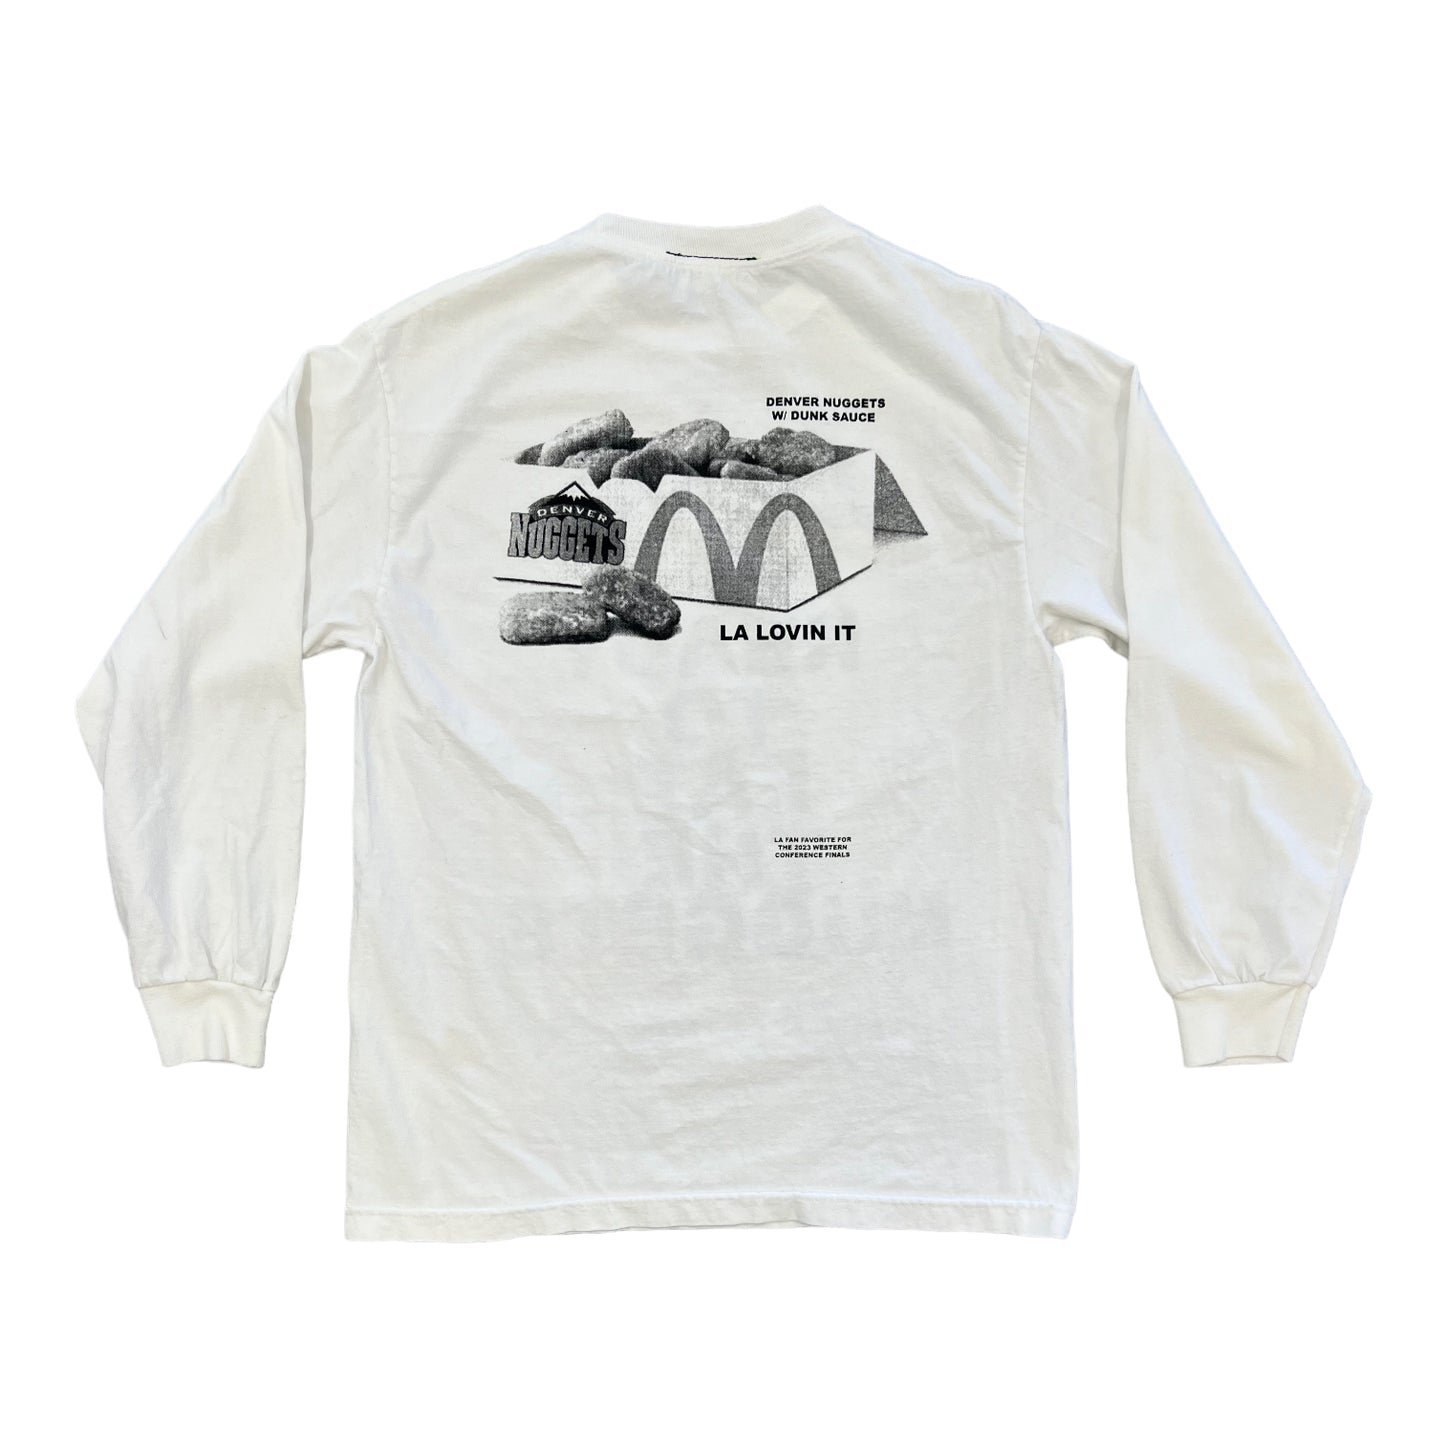 Lakers ready to eat the nuggets Longsleeve